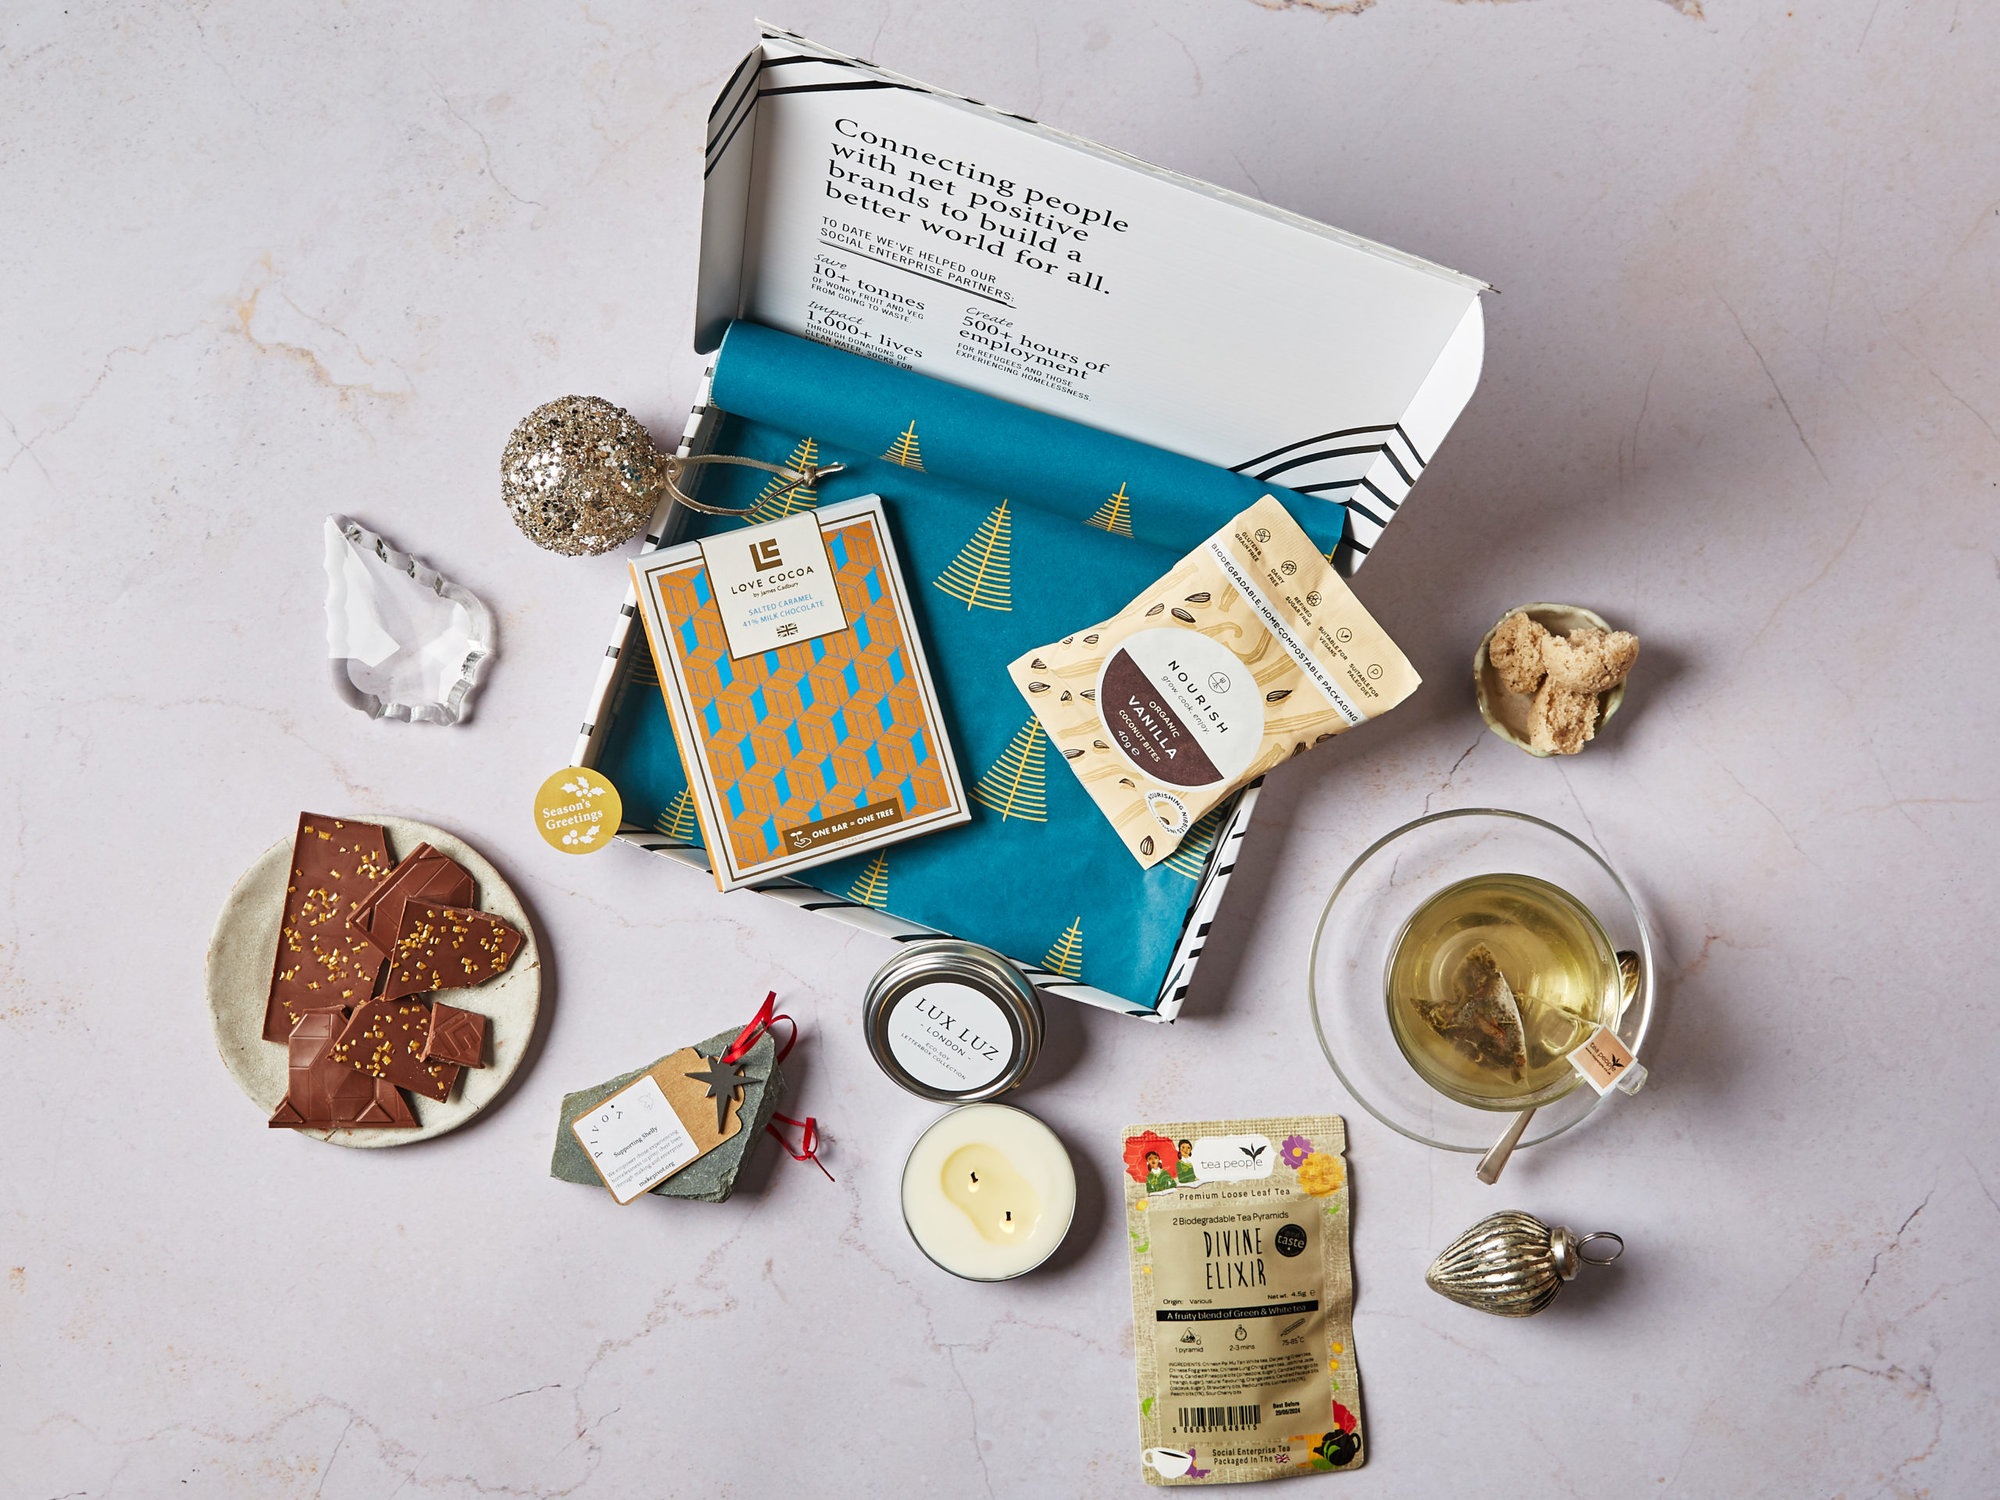 The Life's Little Luxuries Christmas Letterbox Gift